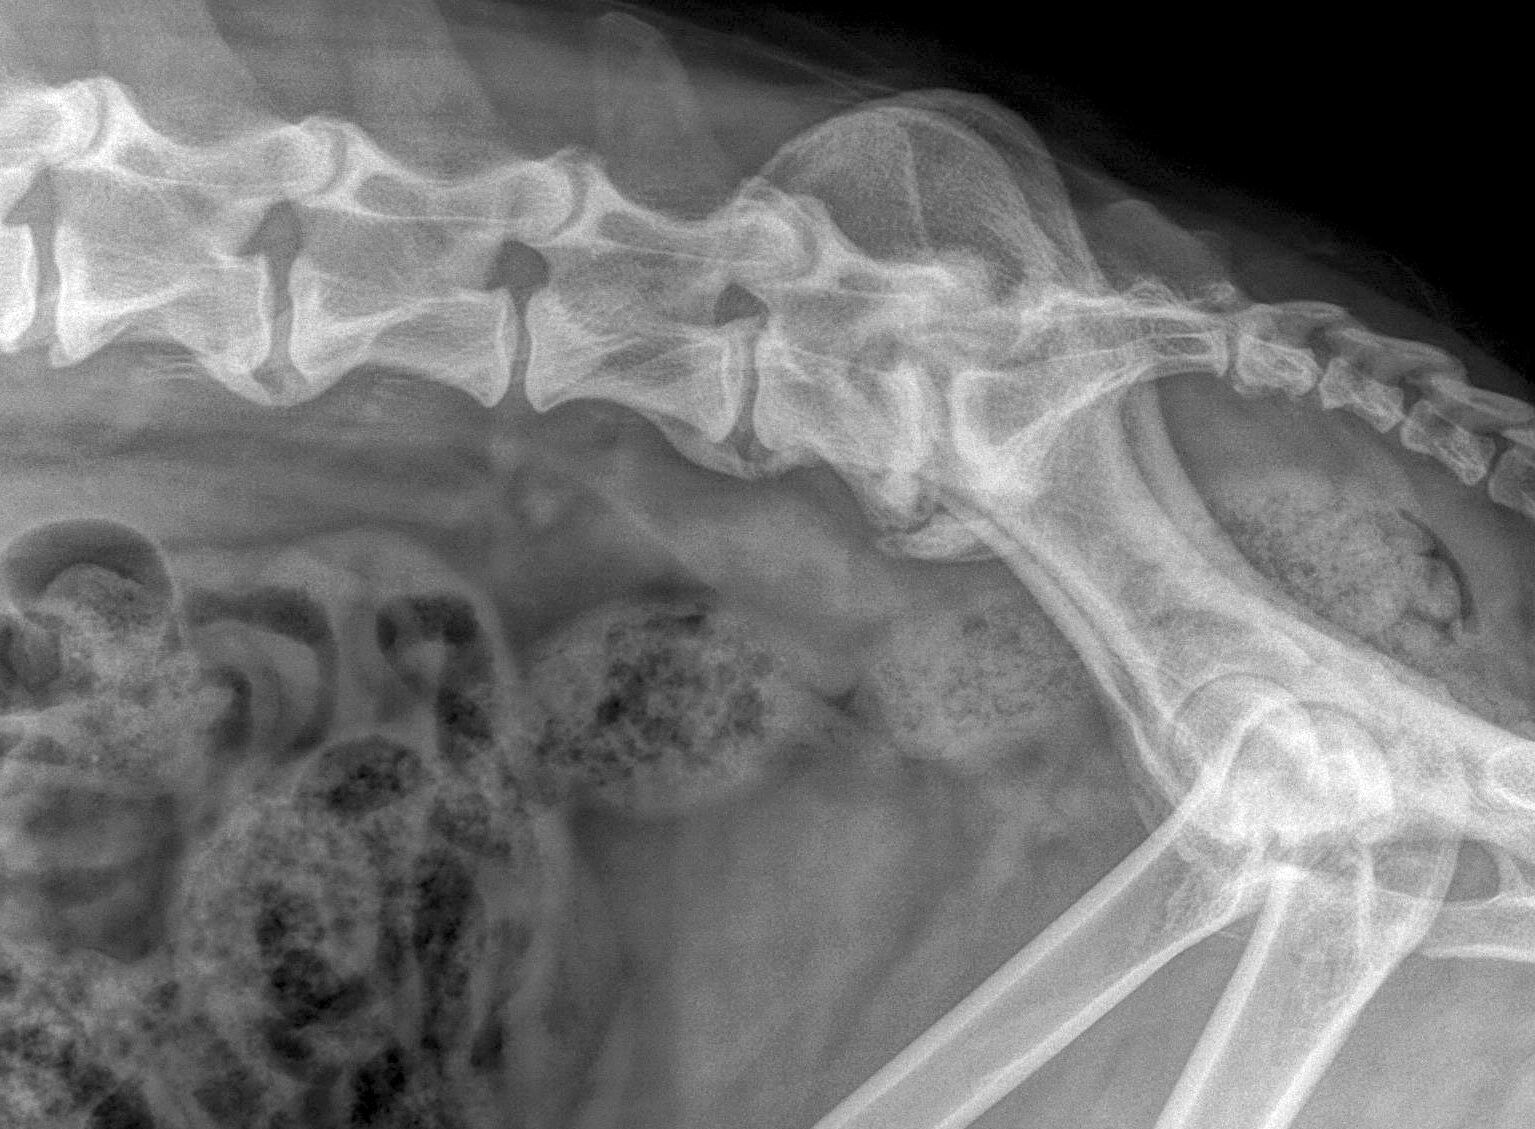 Radiographic evidence of changes in the lumbar and lumbosacral regions of a service dog. 